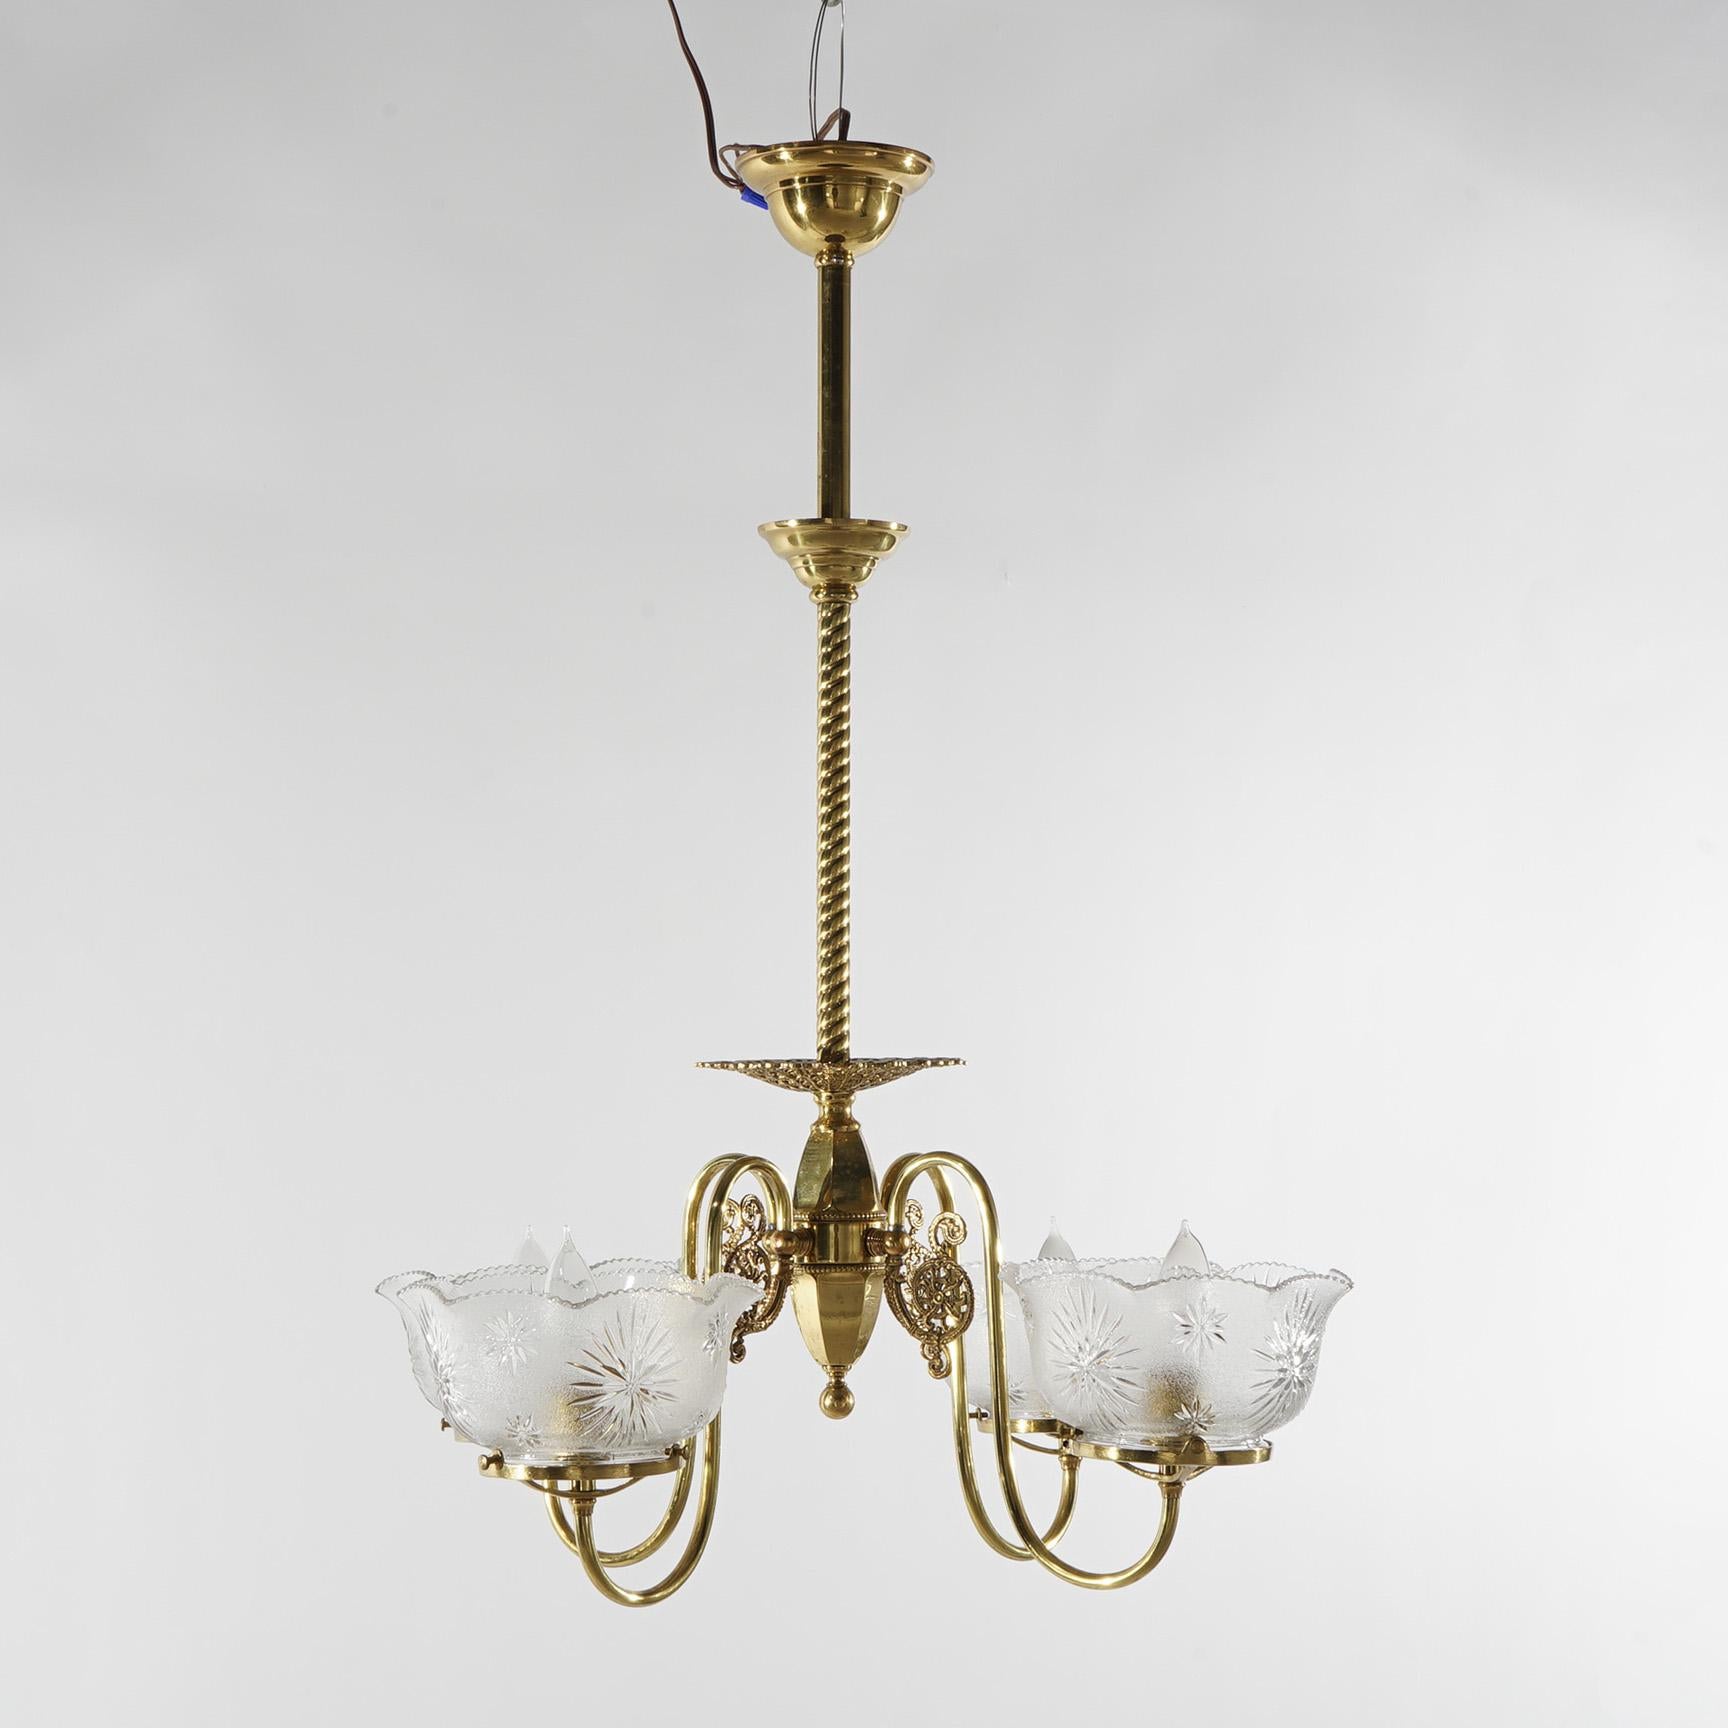 Antique Brass Four-Arm Gas Light Hanging Fixture with Glass Shades C1880 In Good Condition For Sale In Big Flats, NY